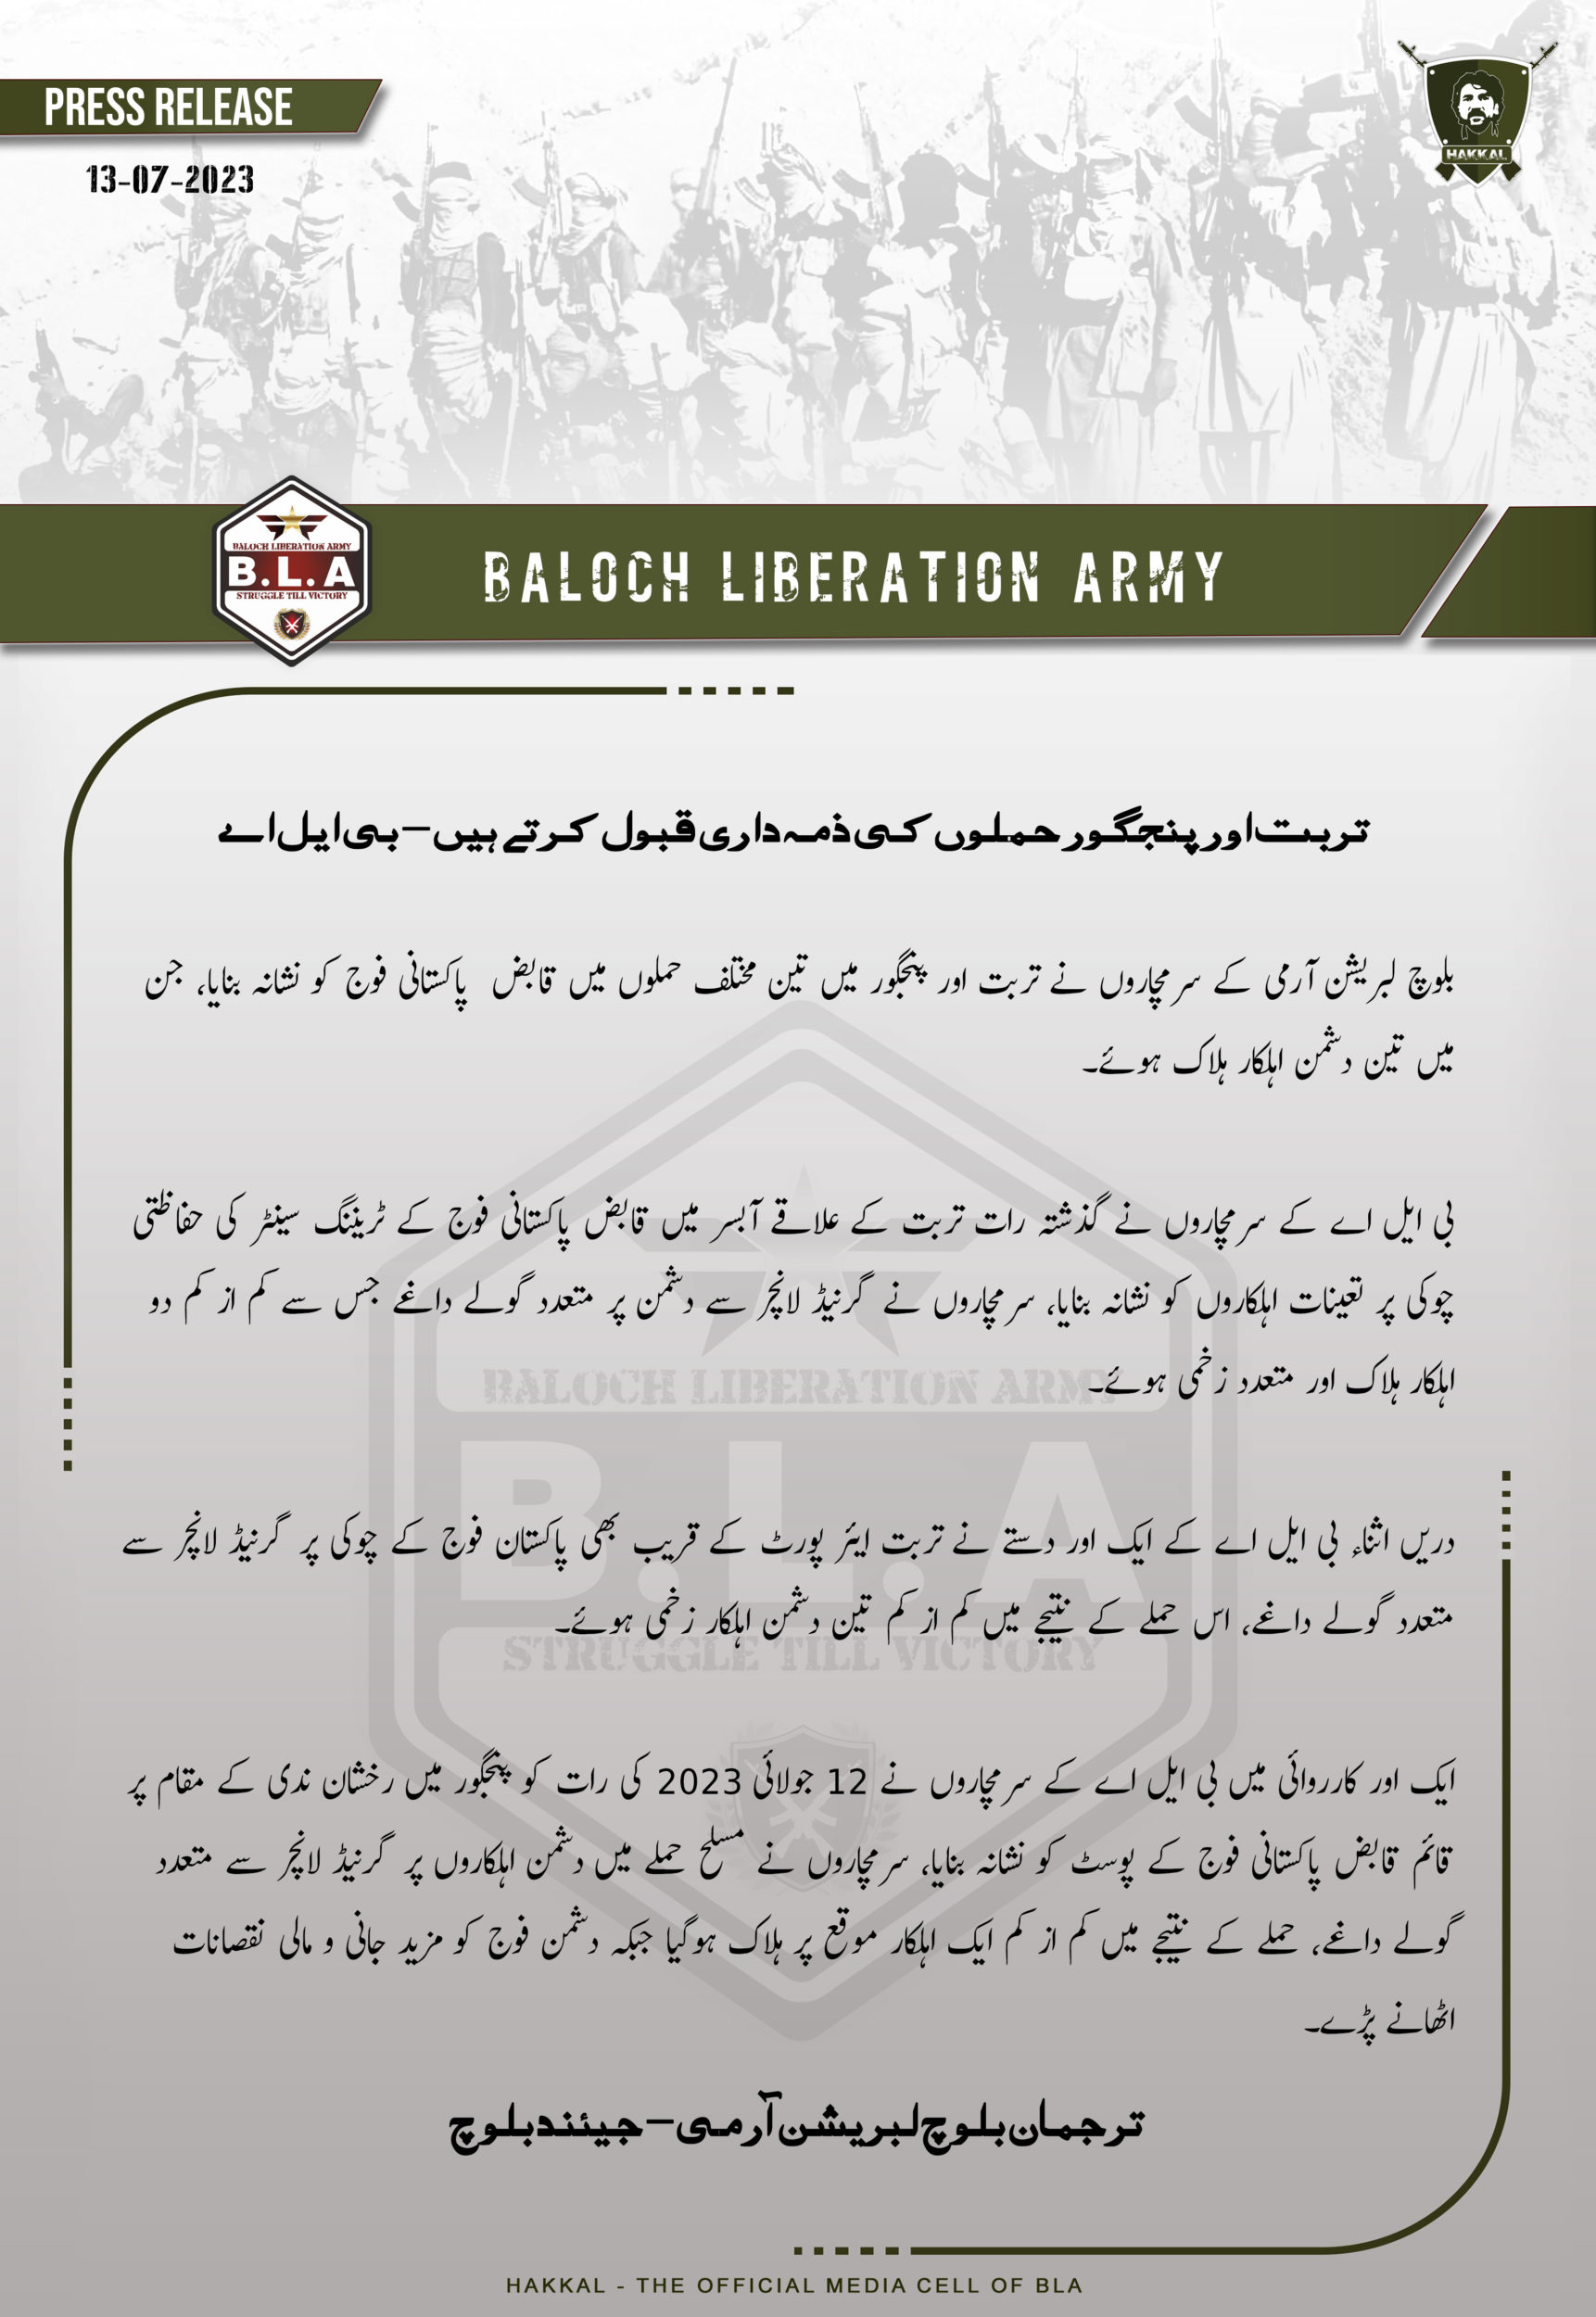 Baloch Liberation Army (BLA) Carried Out Night of Armed Assaults in Turbat and Pangjur, Balochistan, Pakistan - 13 July 2023